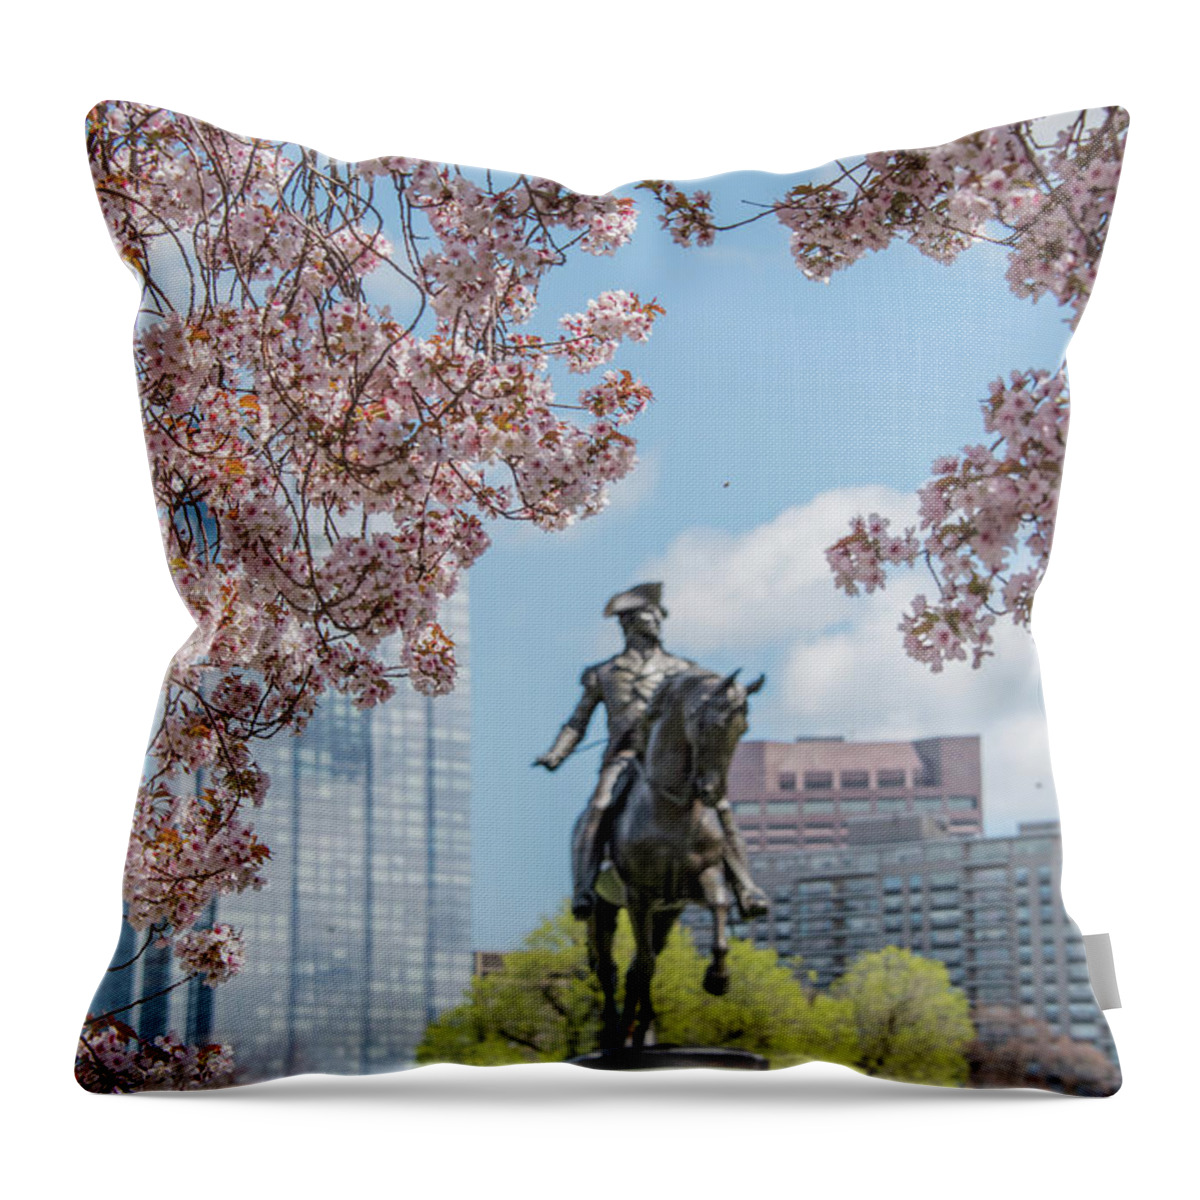 Cherry Blossoms Throw Pillow featuring the photograph Cherry Blossoms Statue by Sally Cooper